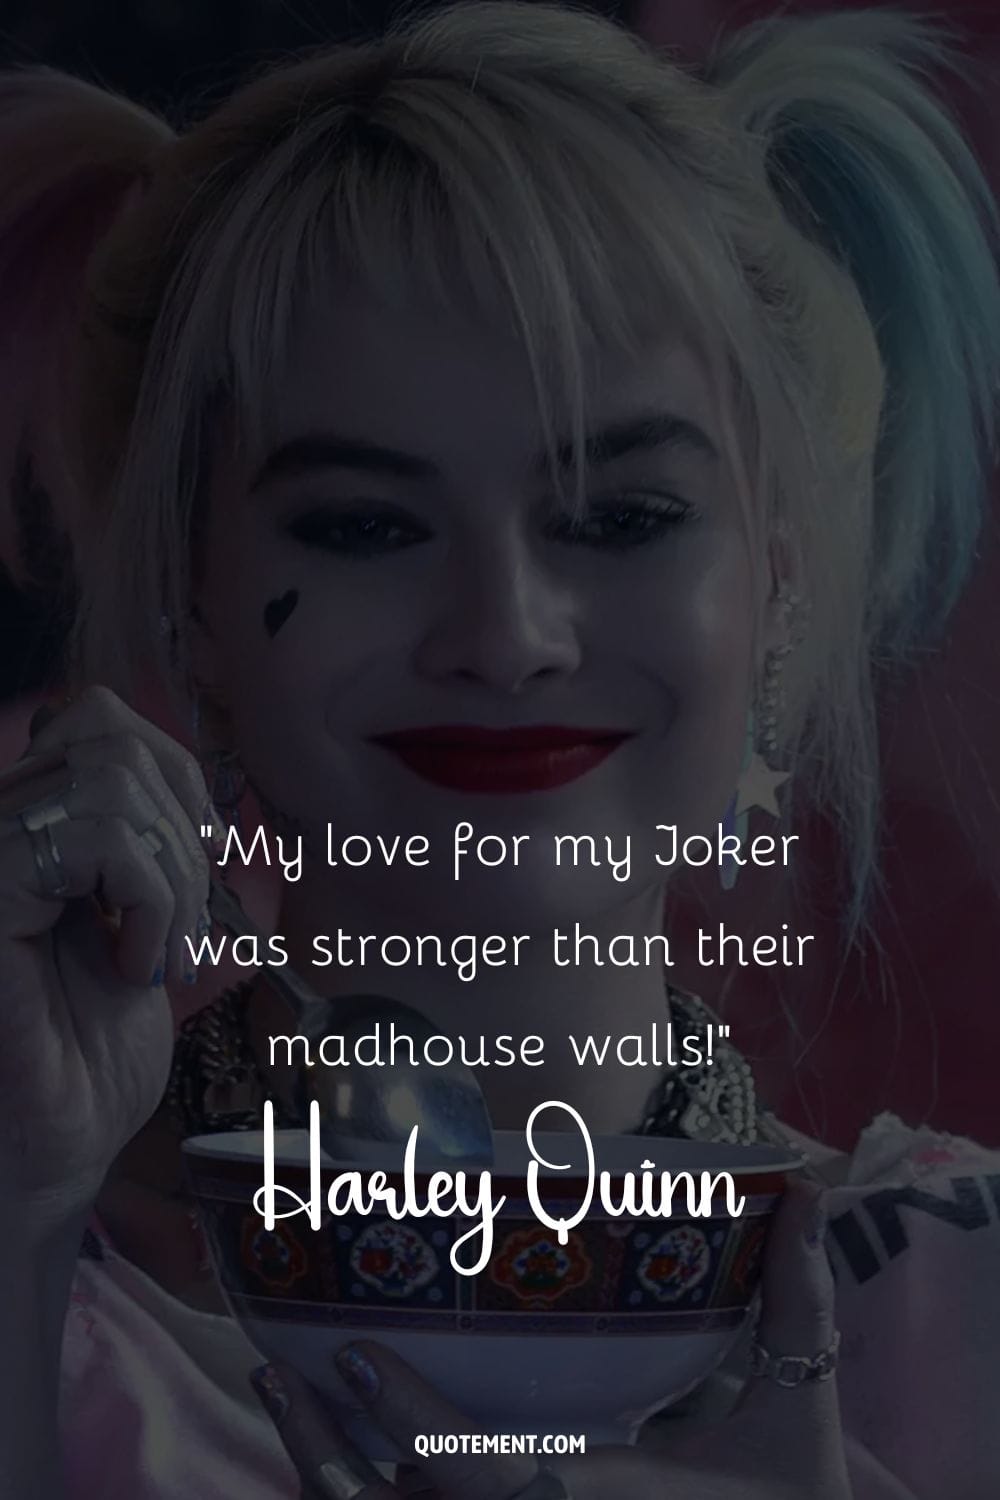 The one and only Harley Quinn Madness personified.